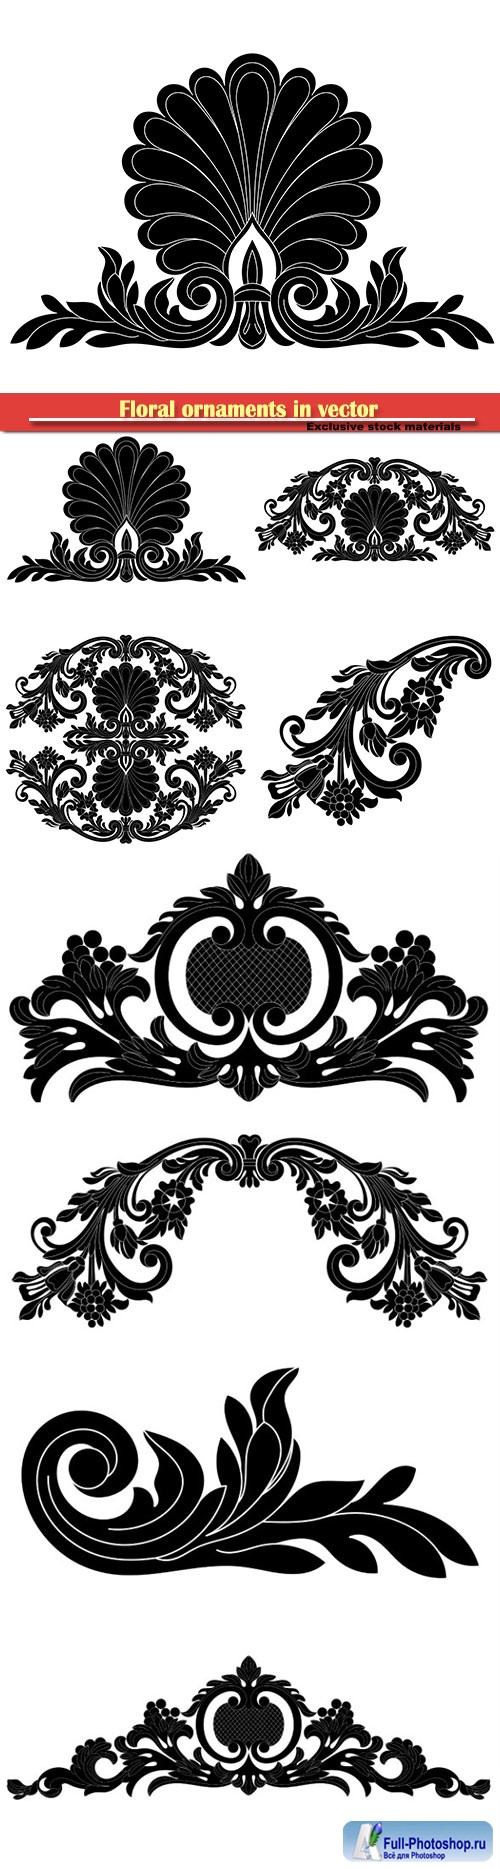 Floral ornaments in vector